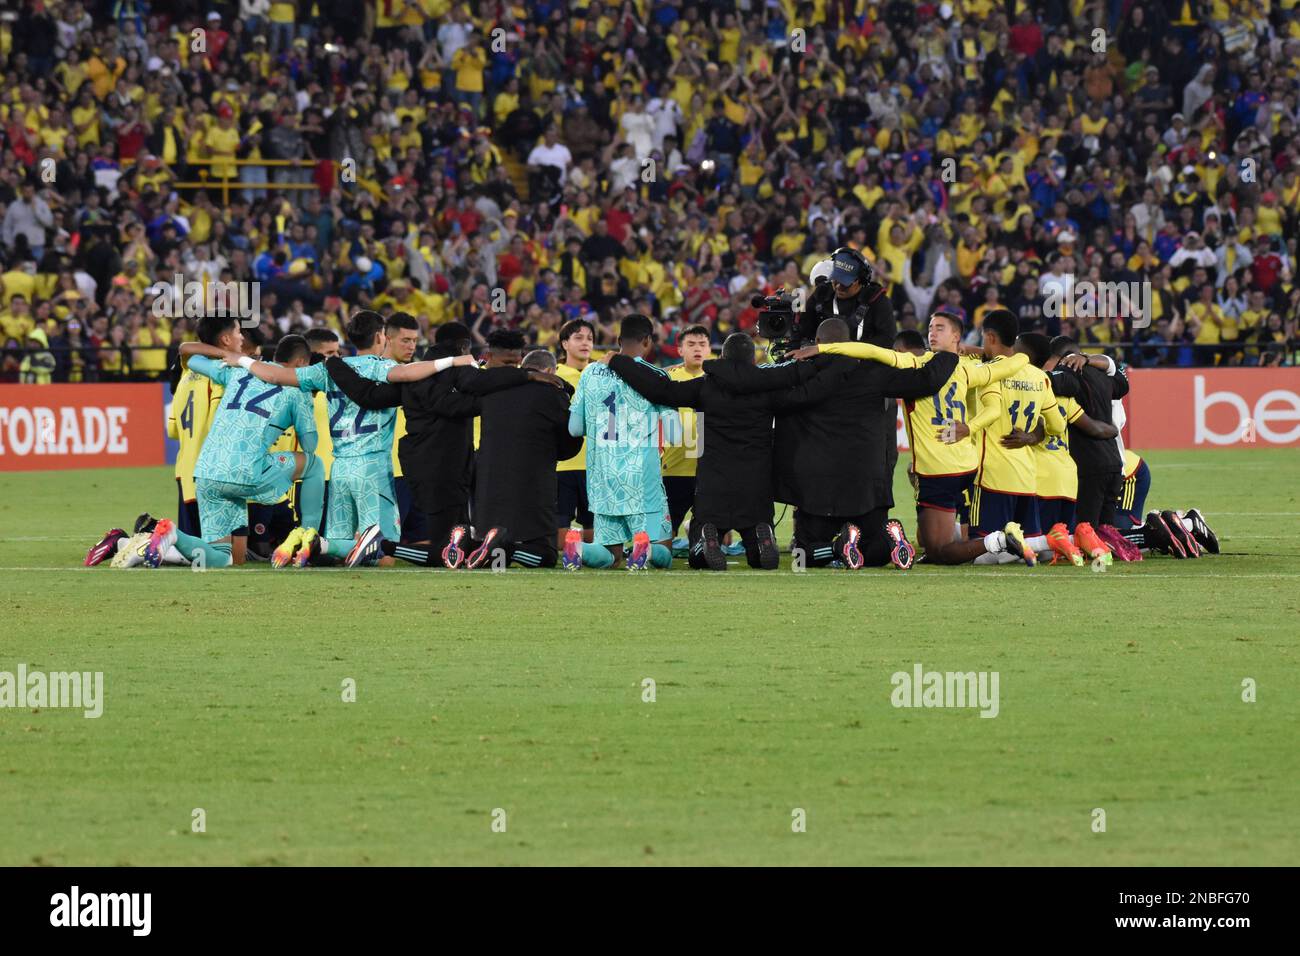 Bogota, Colombia on February 12, 2023. Colombia's national team celebrates after winning the South American U-20 Conmebol Tournament match between Colombia and Venezuela, in Bogota, Colombia on February 12, 2023. Photo by: Cristian Bayona/Long Visual Press Stock Photo